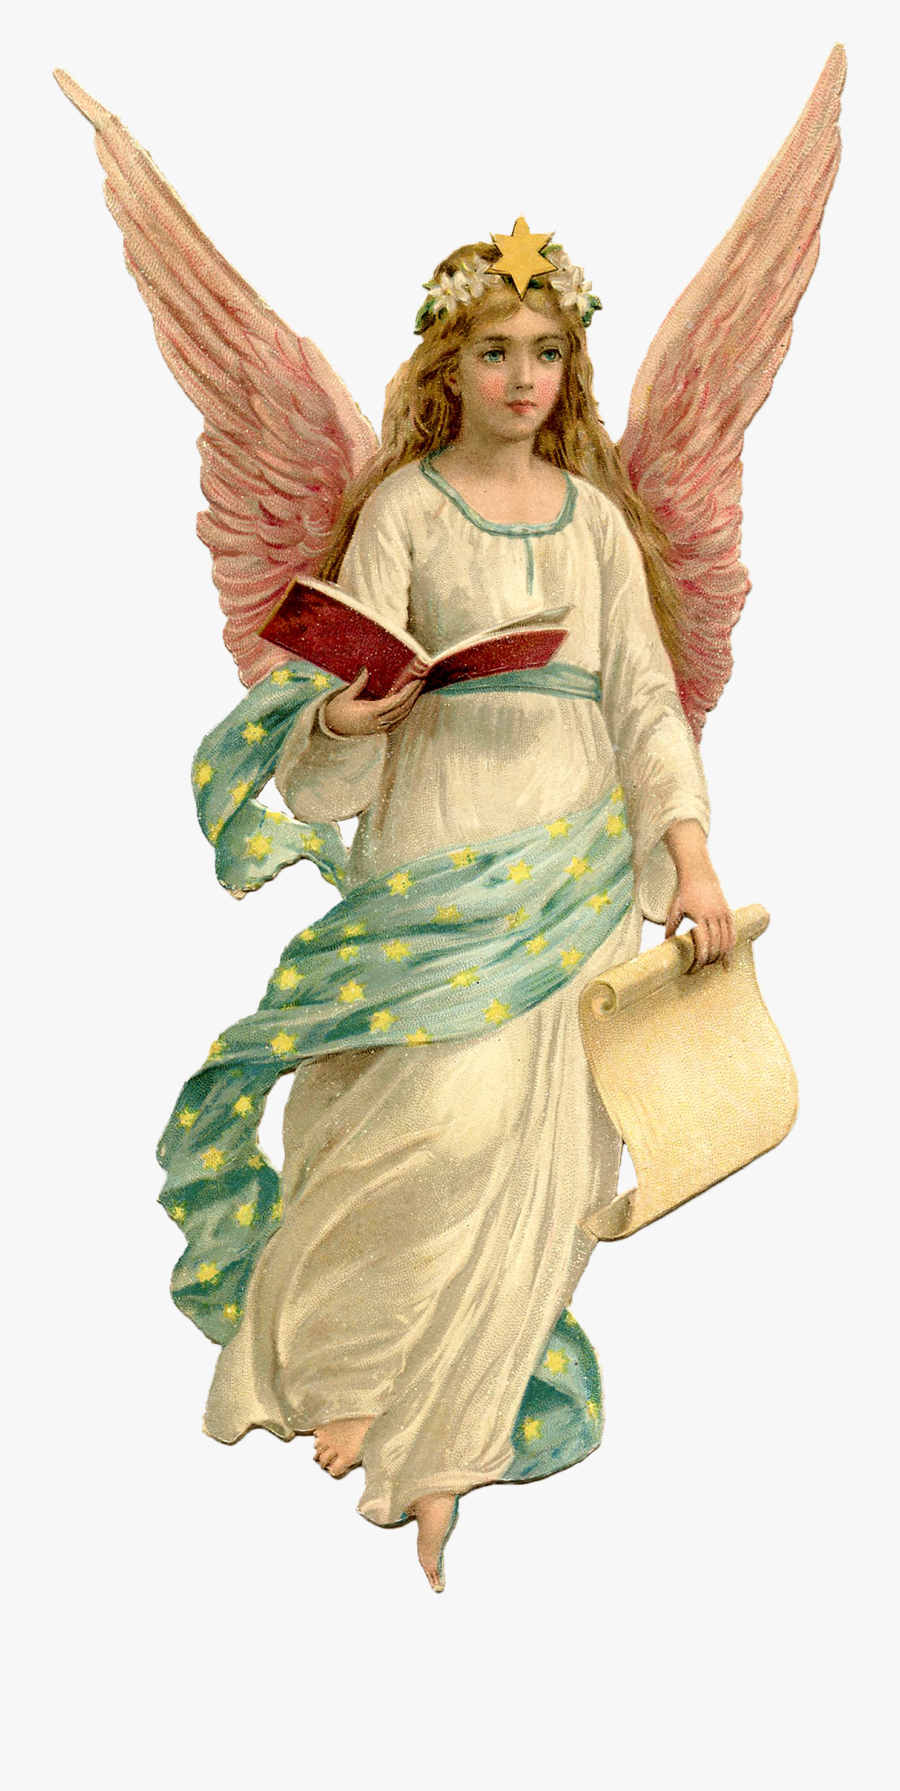 Angel Images For Christmas, Transparent Clipart